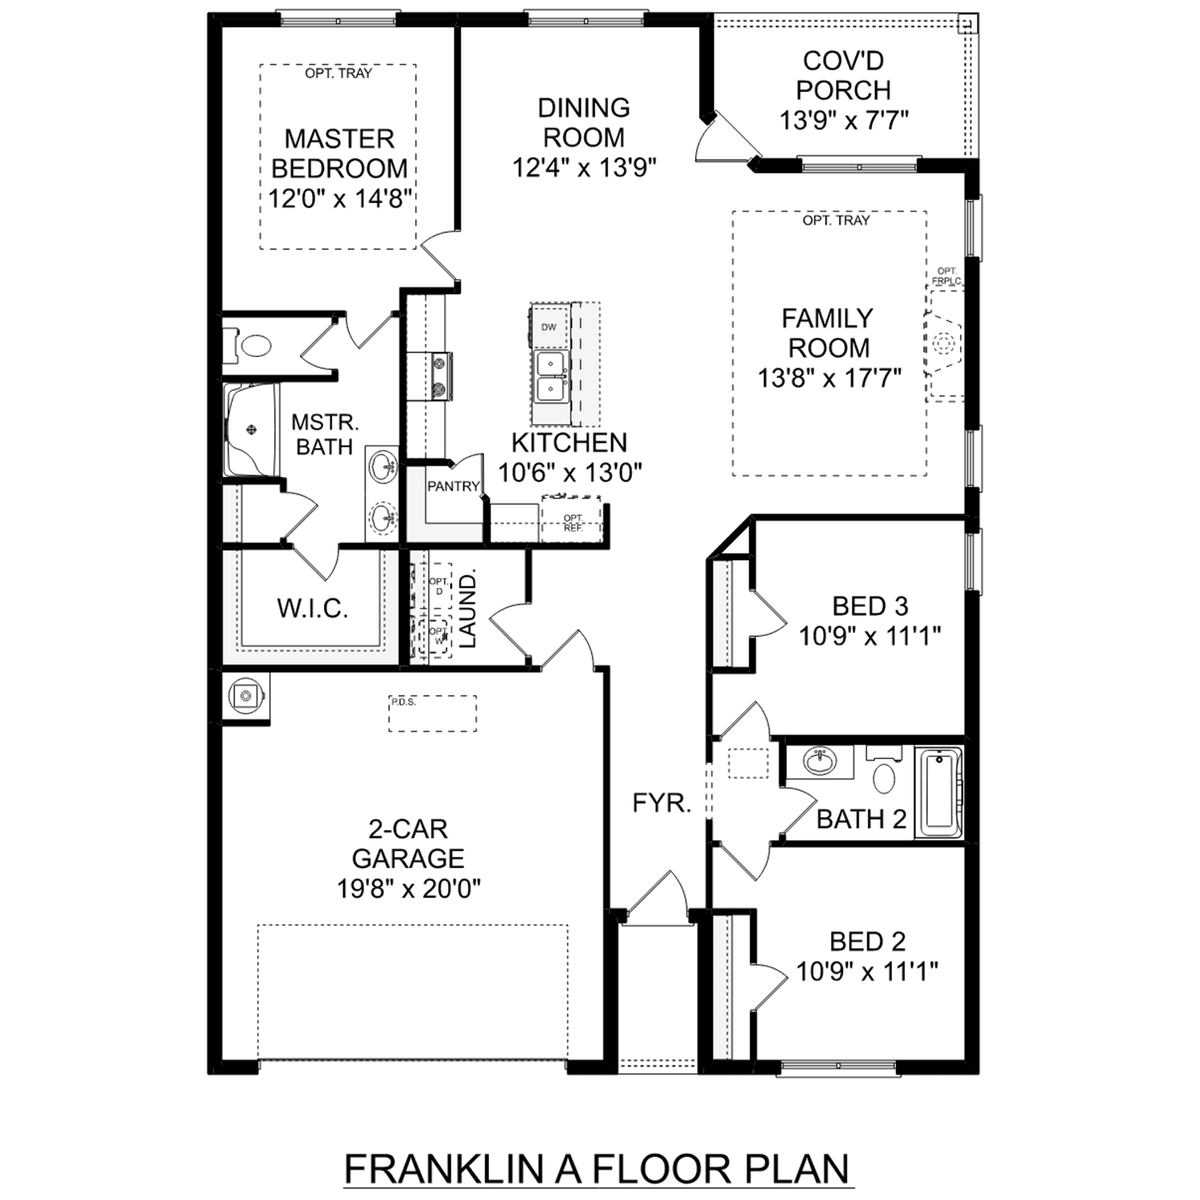 1 - The Franklin floor plan layout for 26684 Kyle Lane in Davidson Homes' Ricketts Farm community.